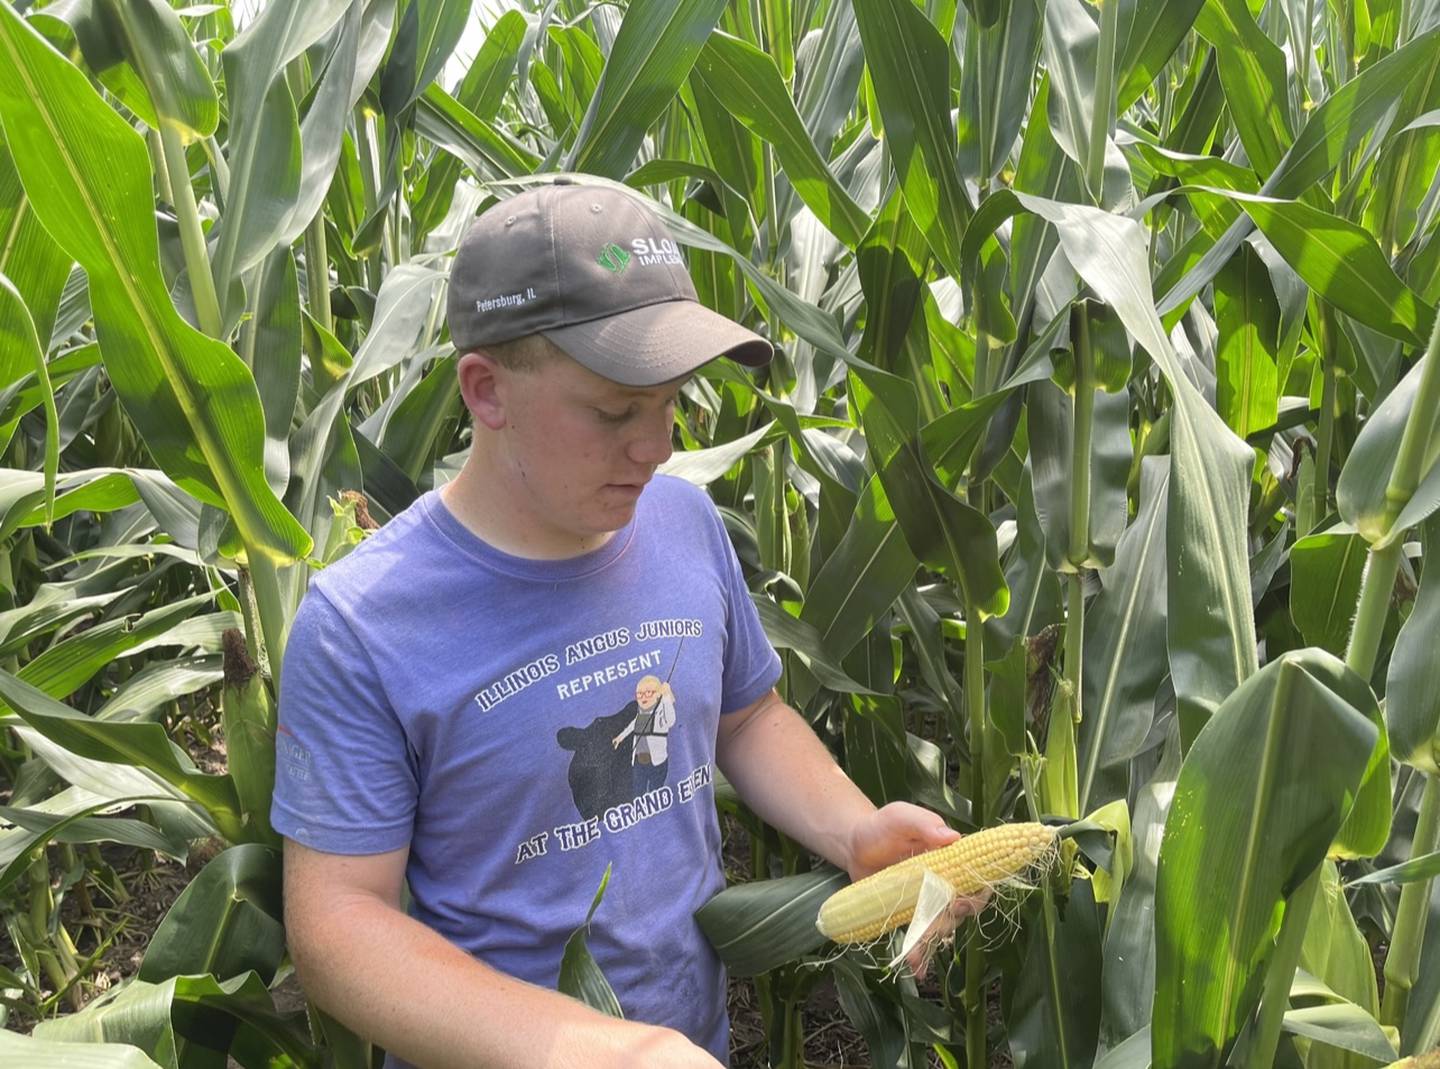 Drew Mickey checks his corn which is just one of many responsibilities he has with his projects that also include raising soybeans and wheat.